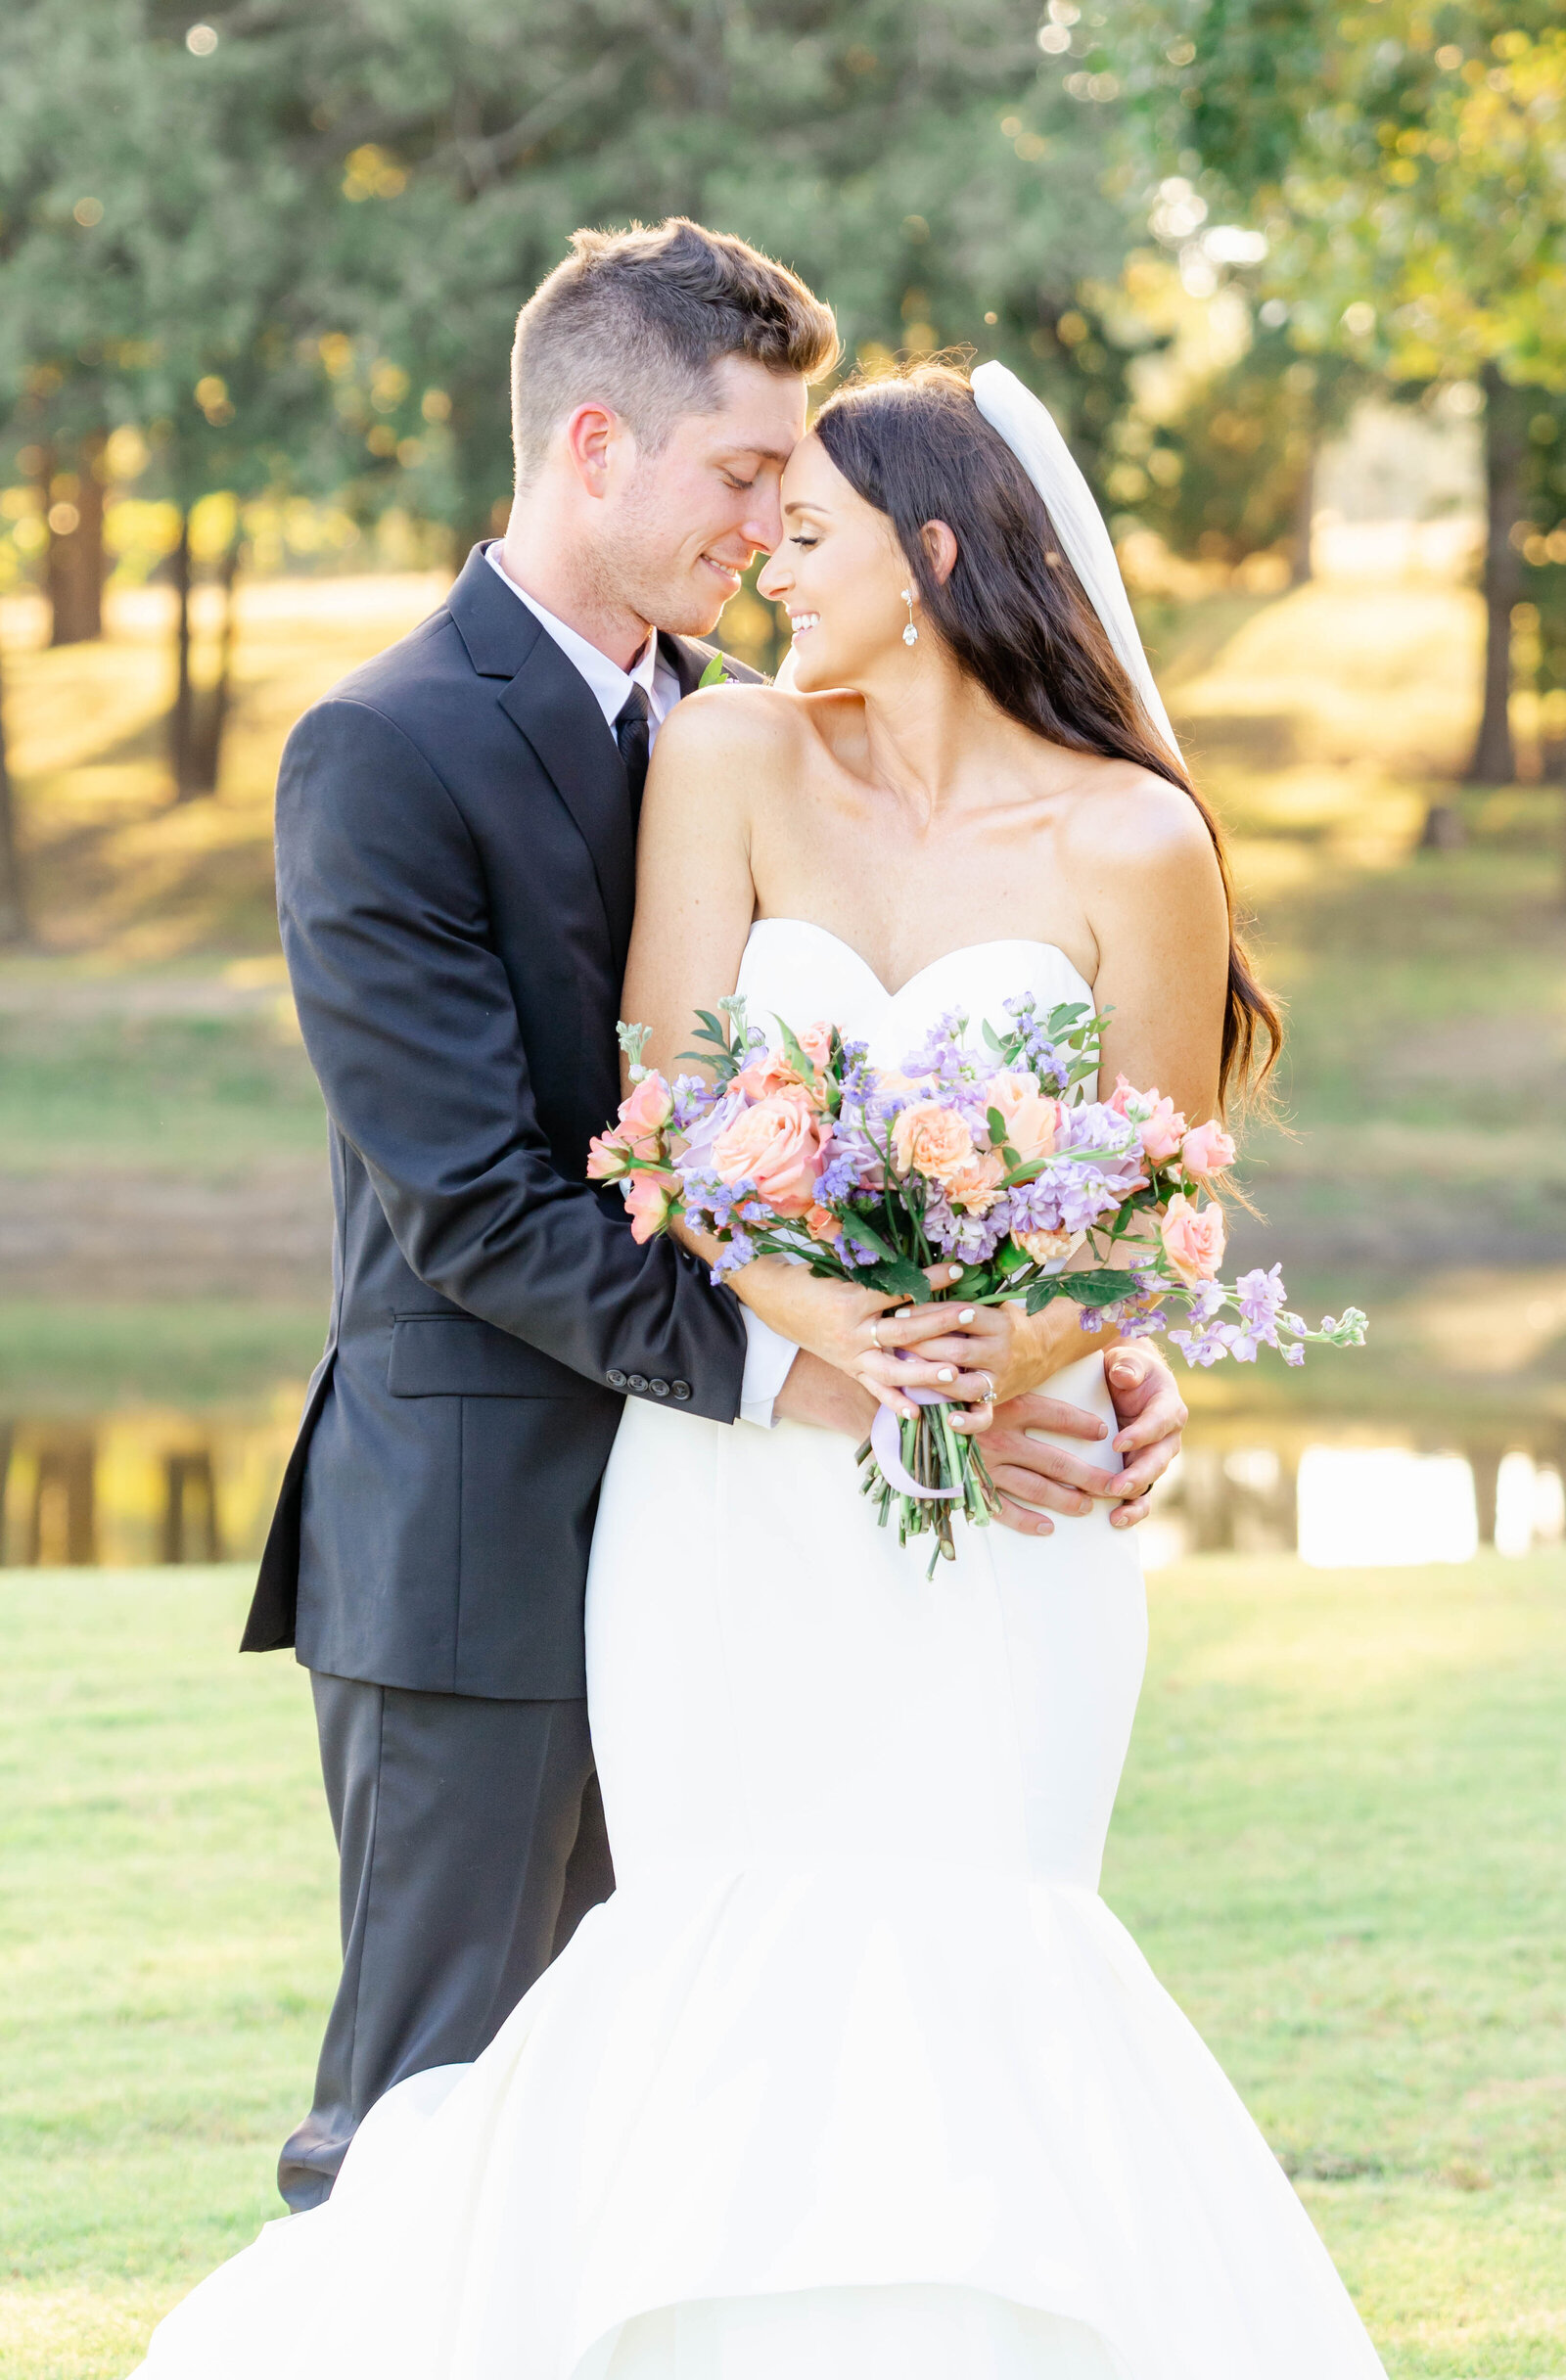 Portrait of bride and groom in a white wedding gown and black tuxedo embracing each other in front of a body of water.